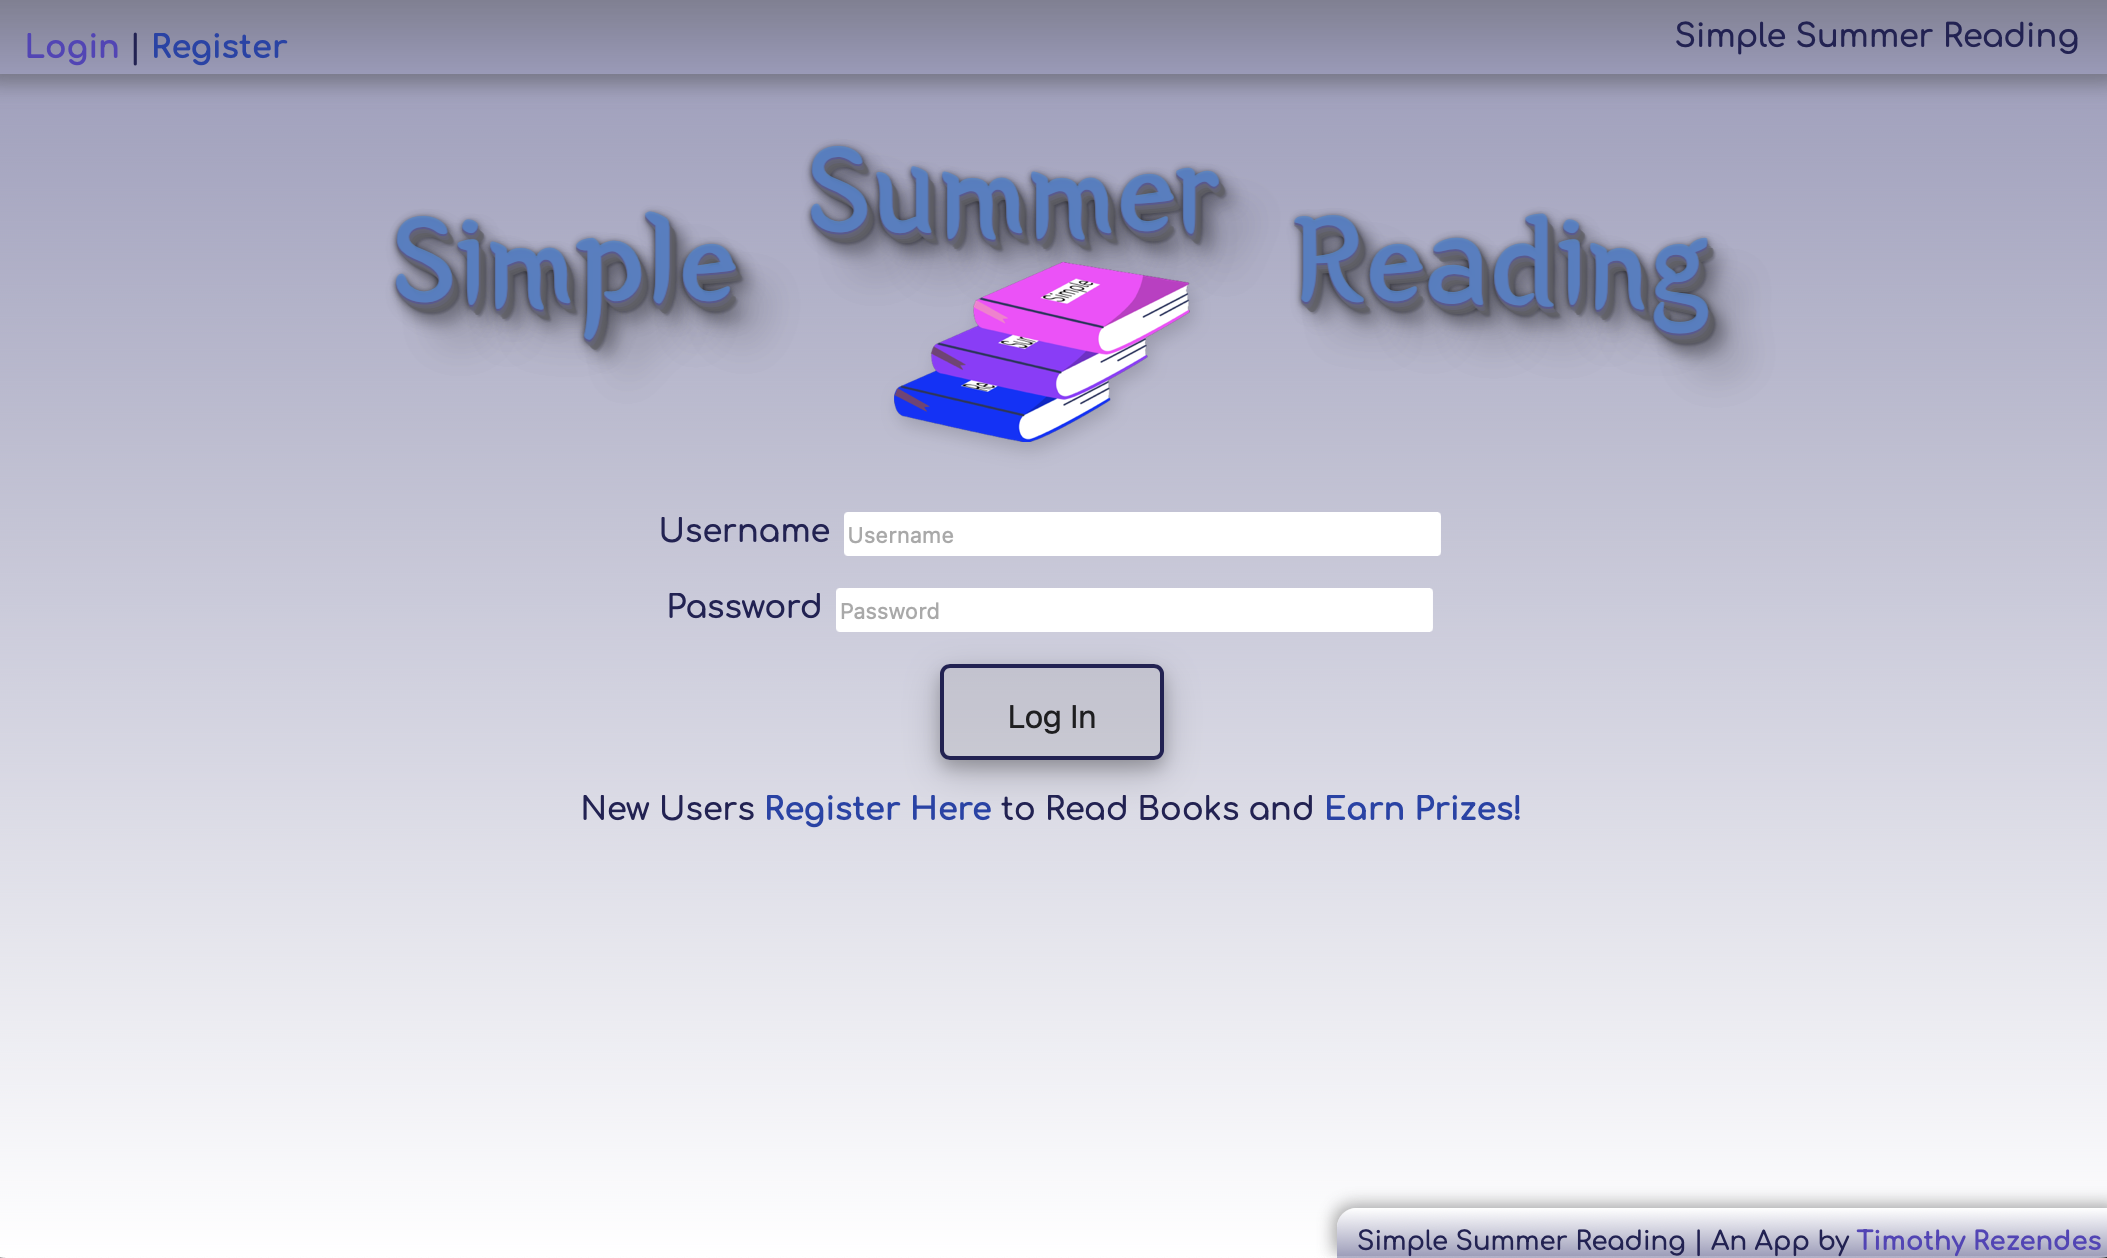 Simple Summer Reading login page